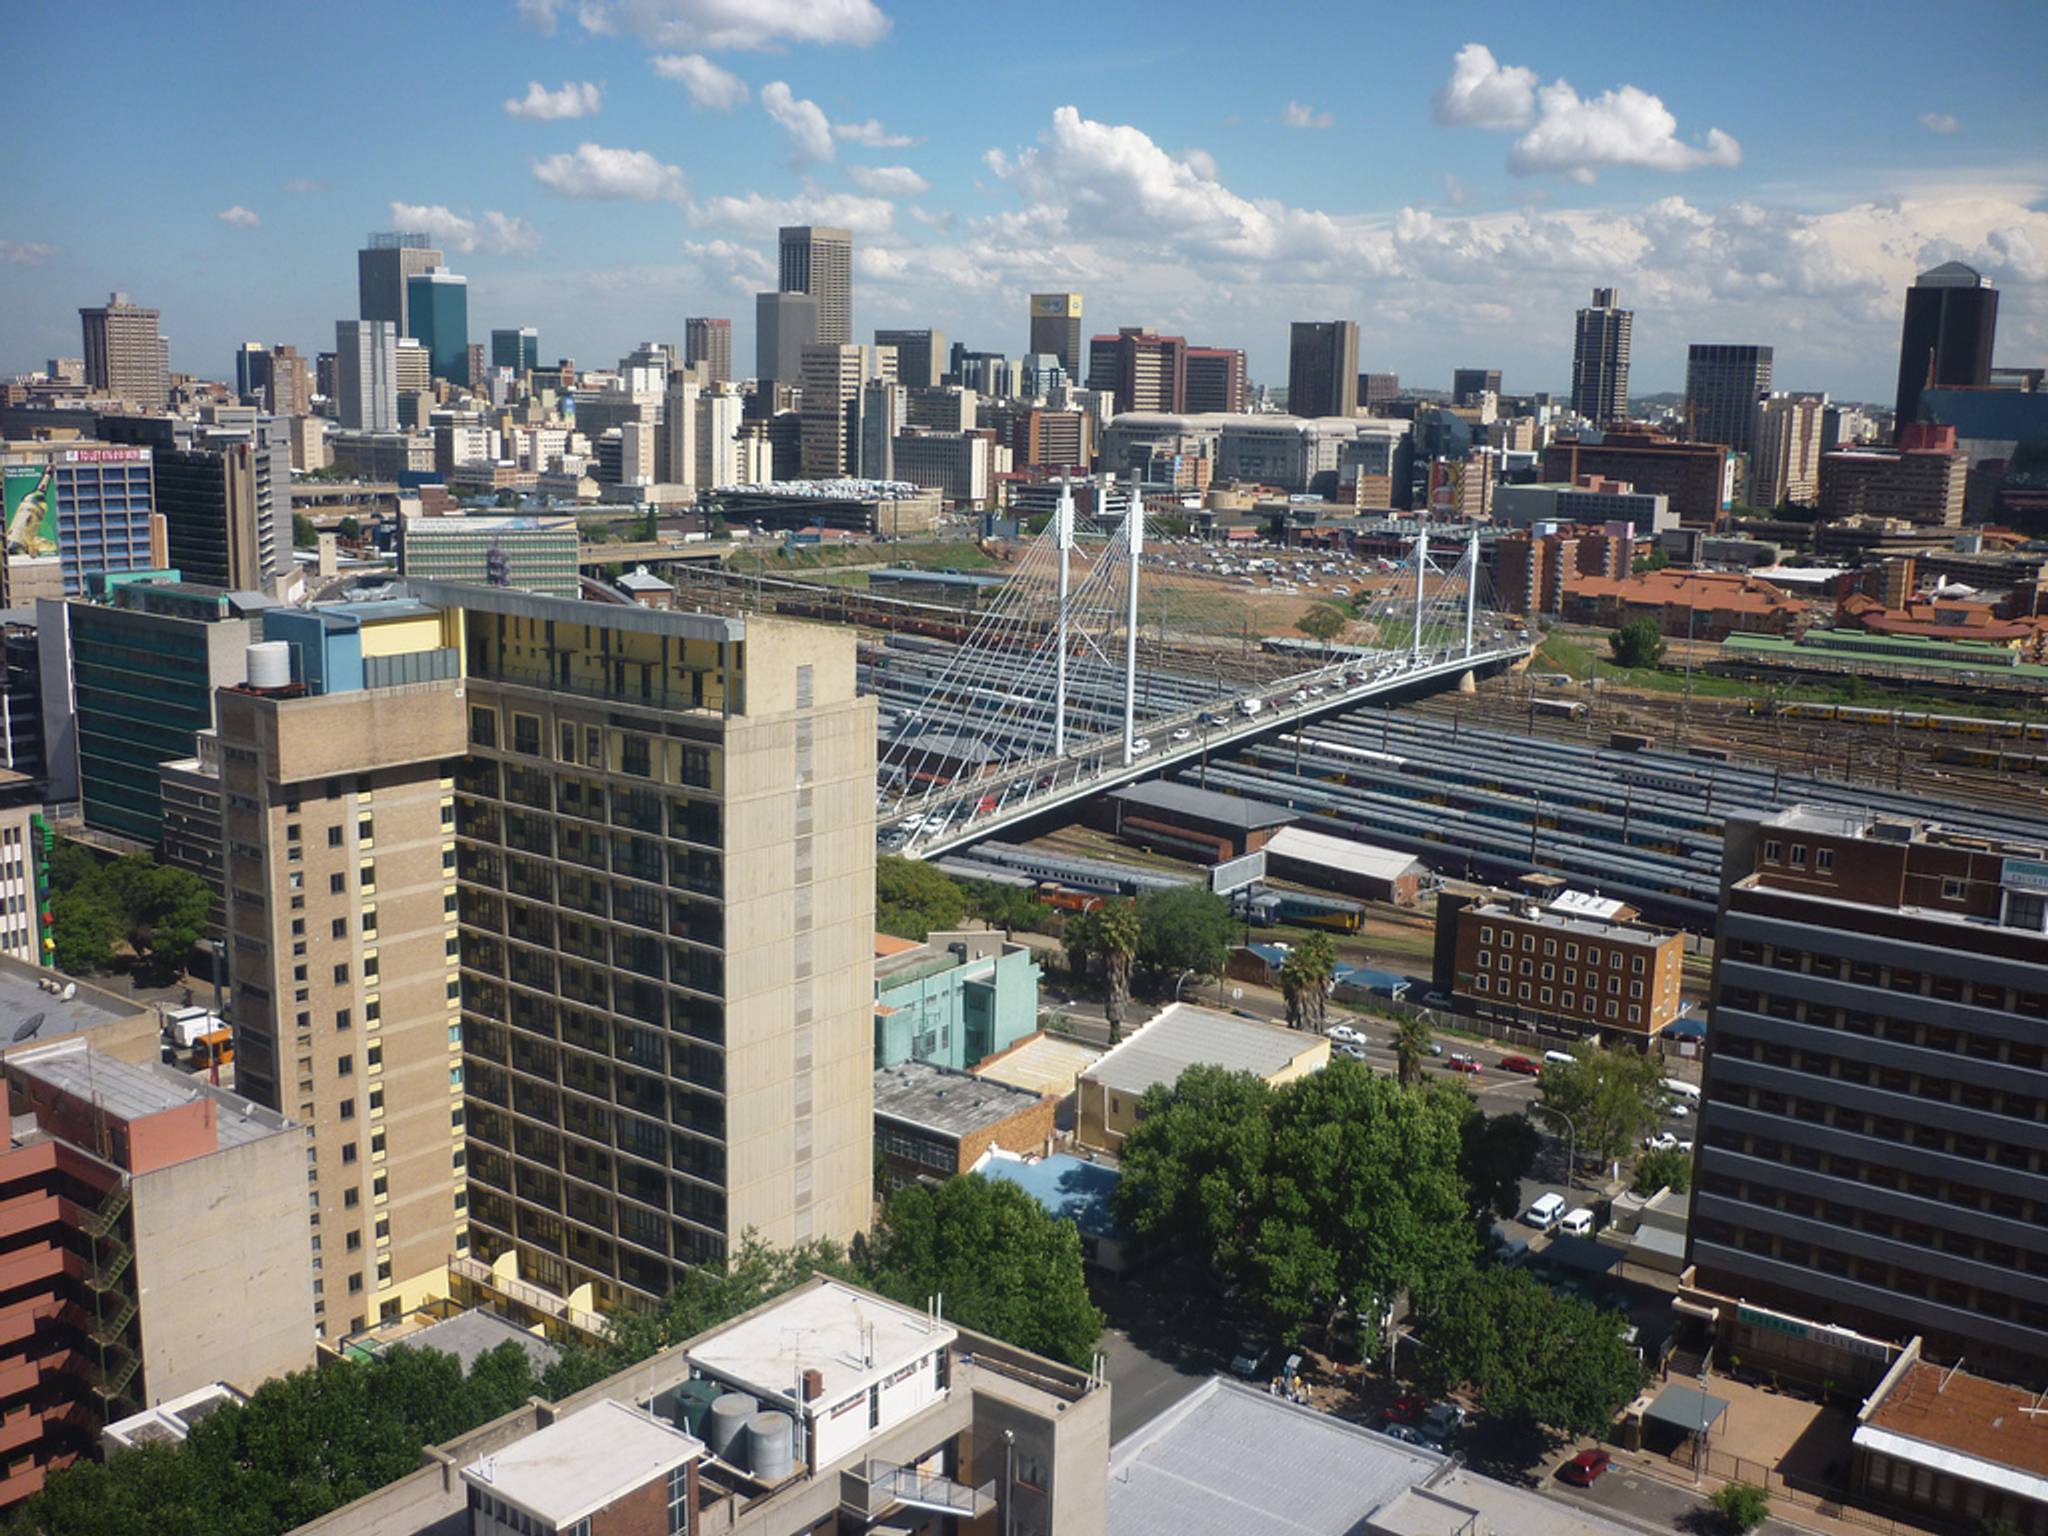 South Africa is ready for a sustainable transport